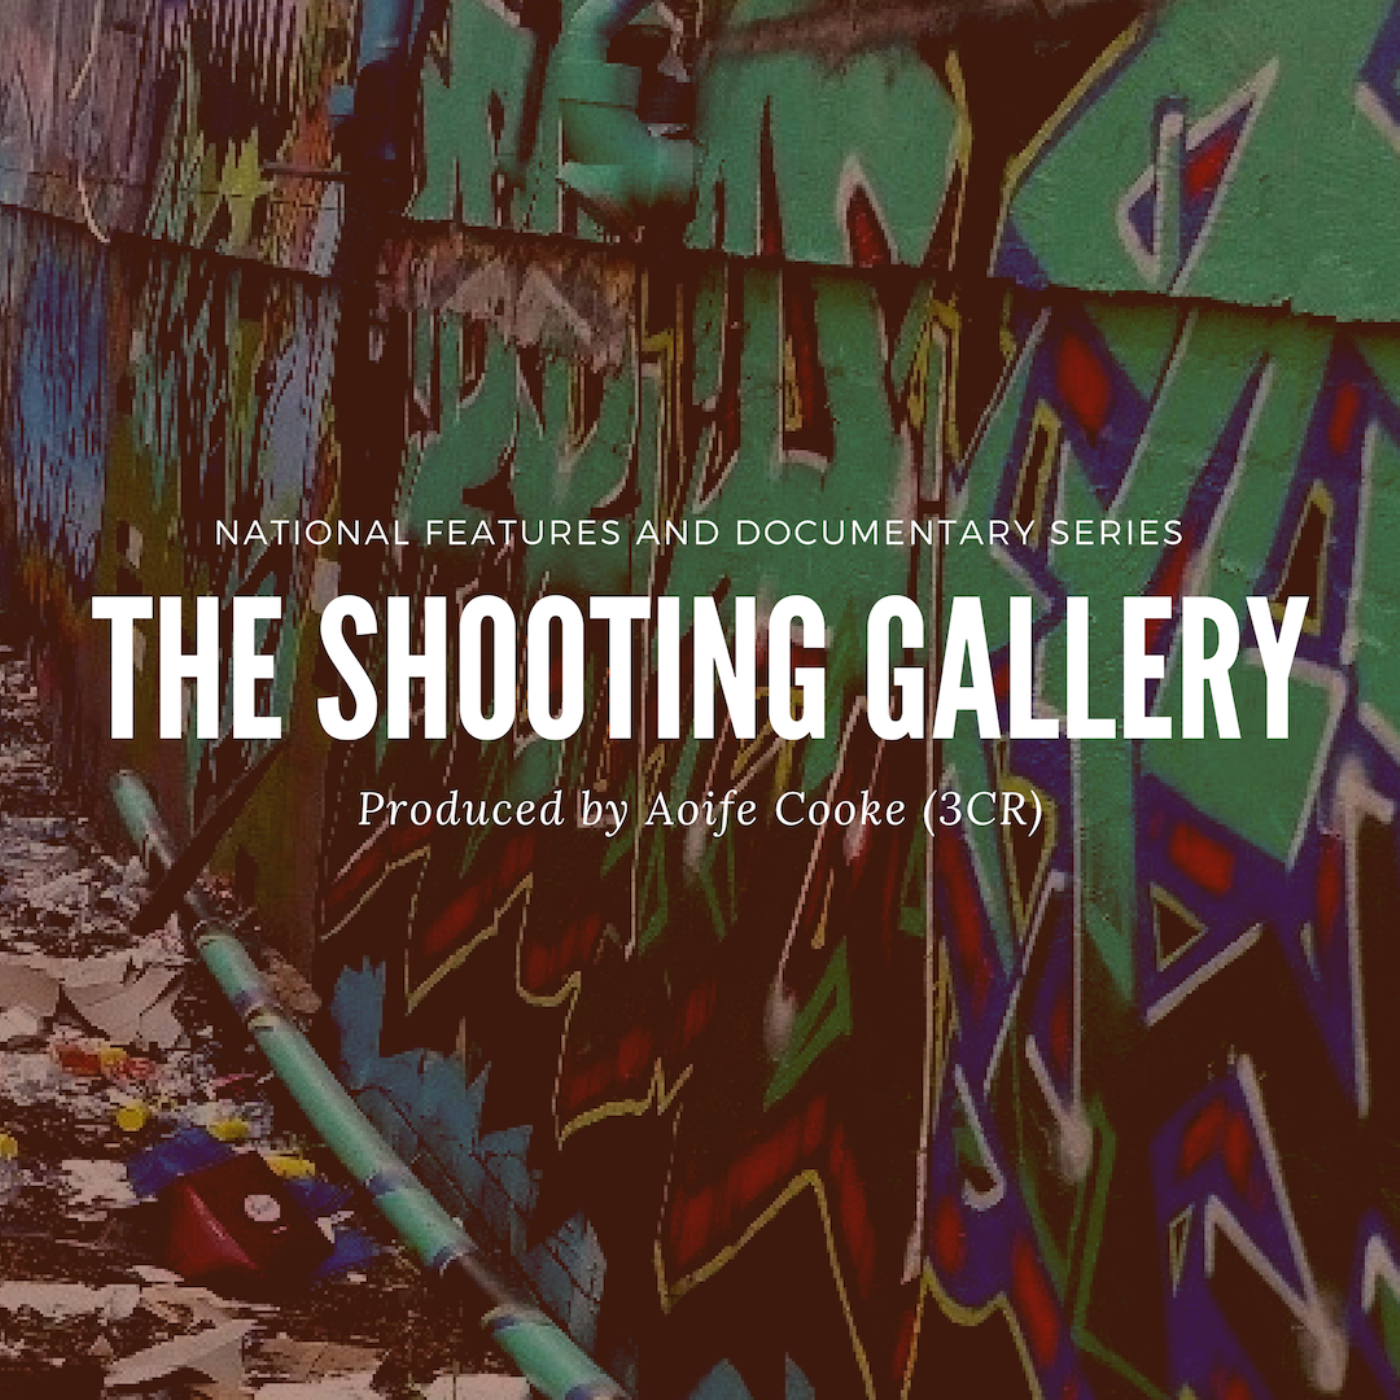 The Shooting Gallery (3CR, Melbourne)